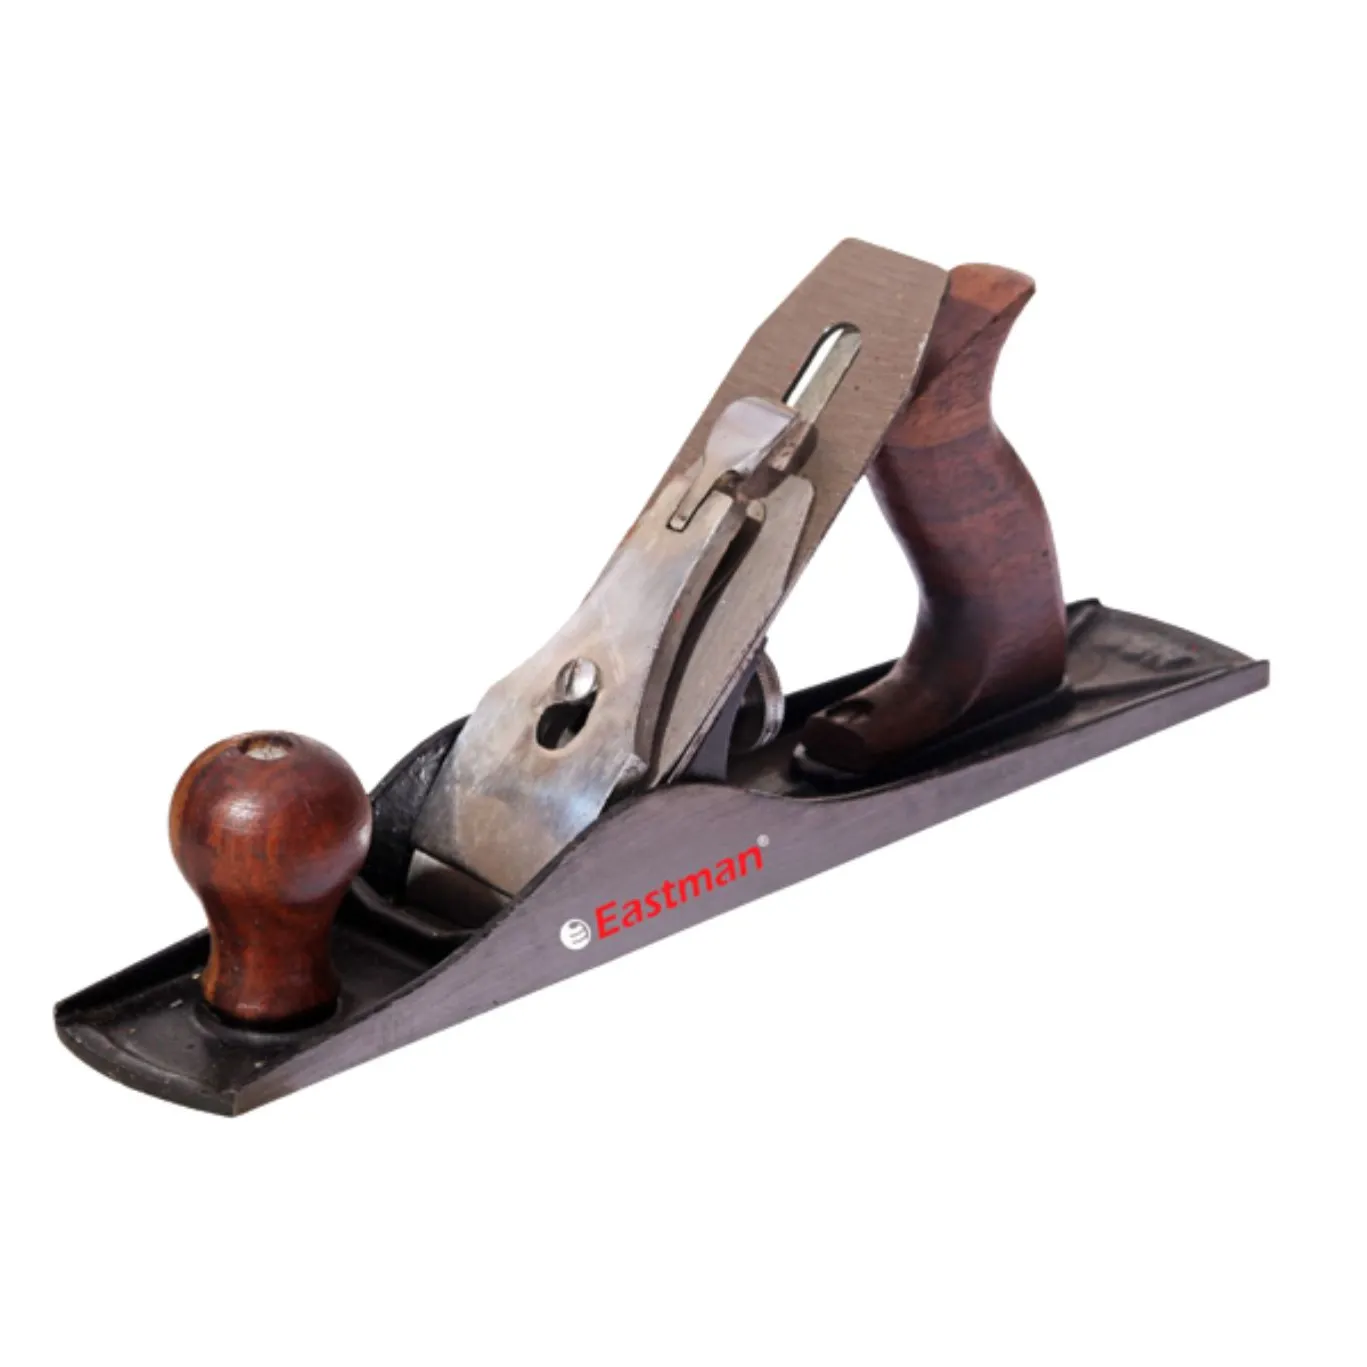 Top quality Heavy Duty Iron Jack Plane Carpentry Tools for Professional Wood Worker with Plane and Corrugated Base tools